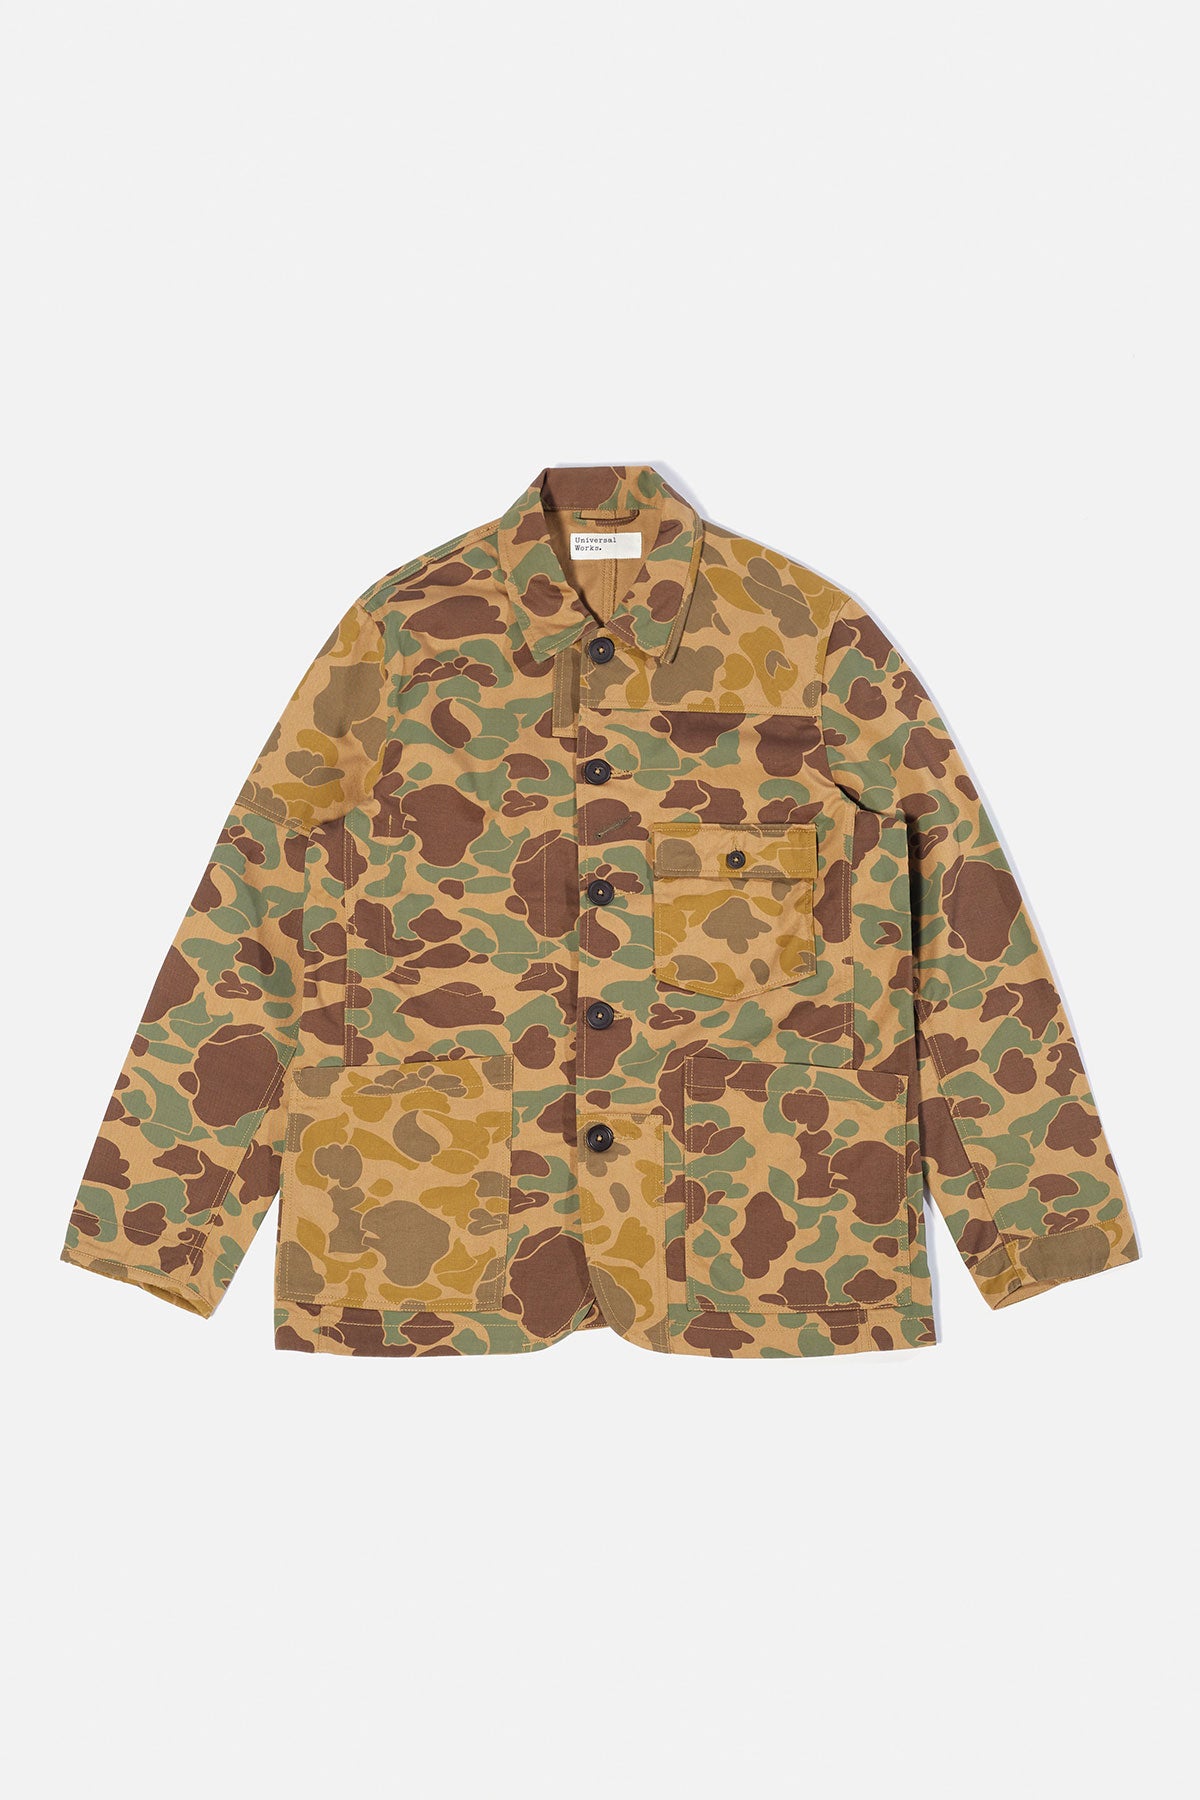 Universal Works Patched Mill Bakers Jacket In Sand/Khaki Cotton Camo